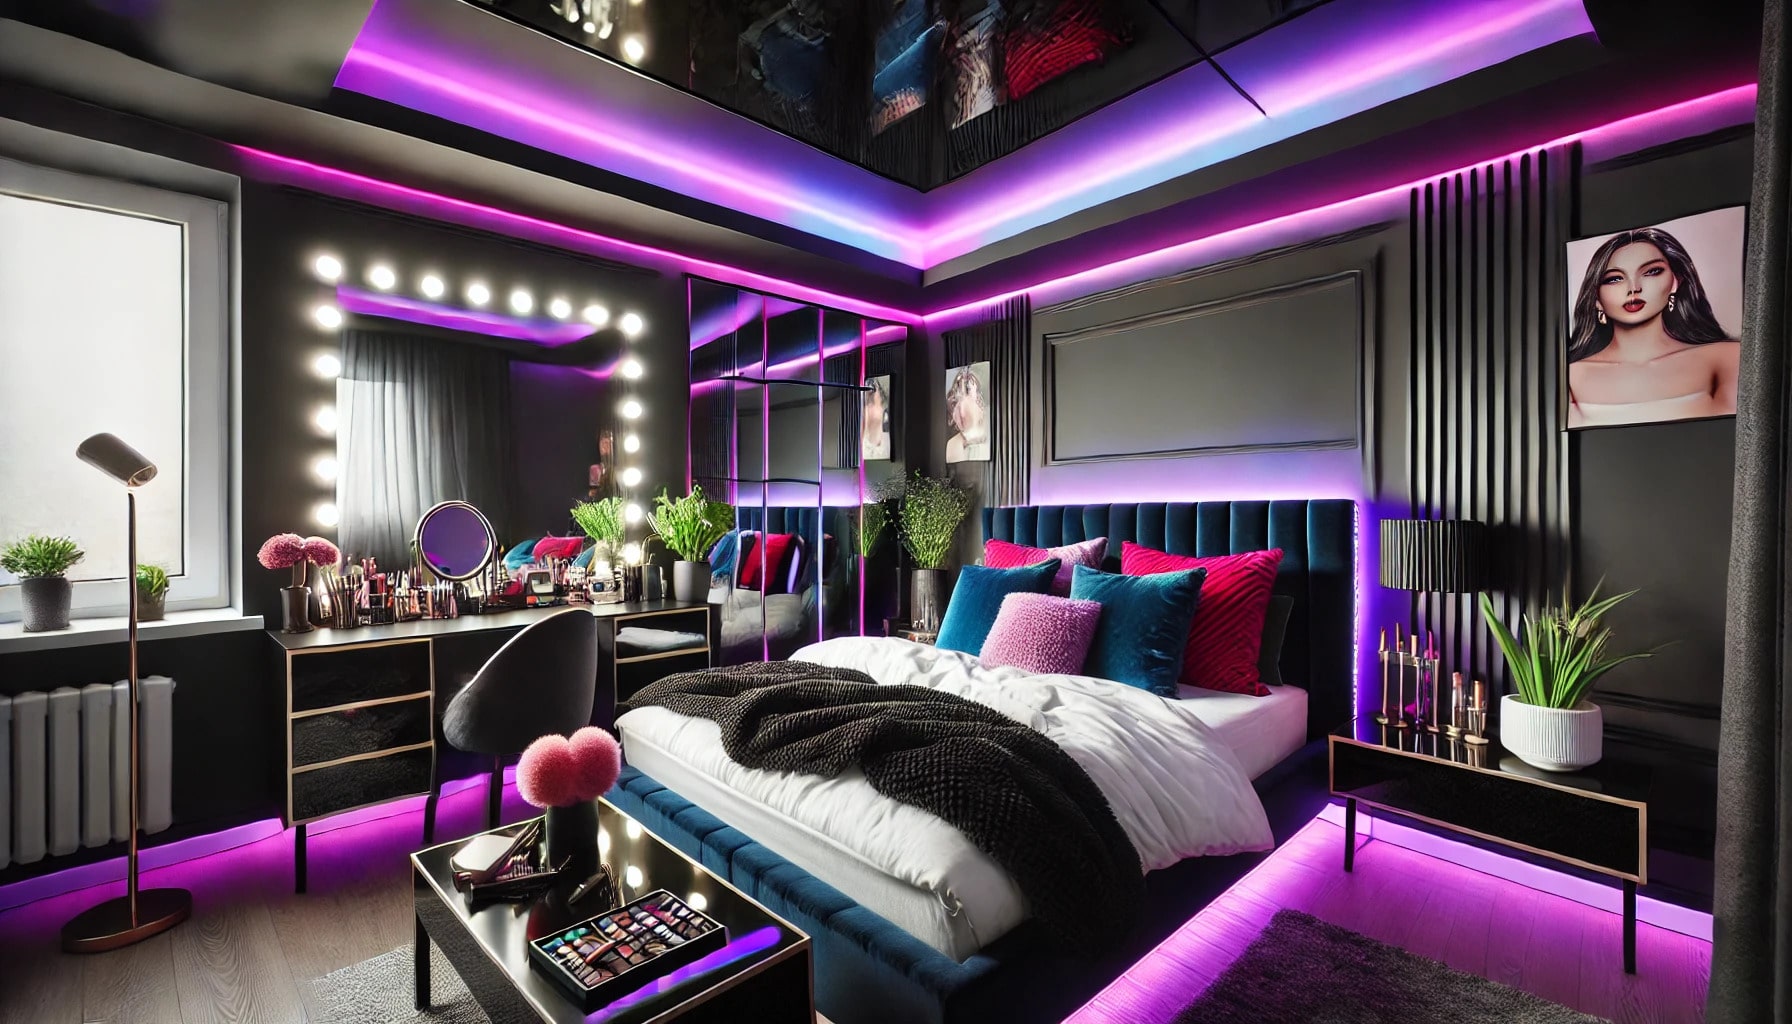 Baddie Aesthetic Room Inspiration Using LED Lights to Elevate Your Space